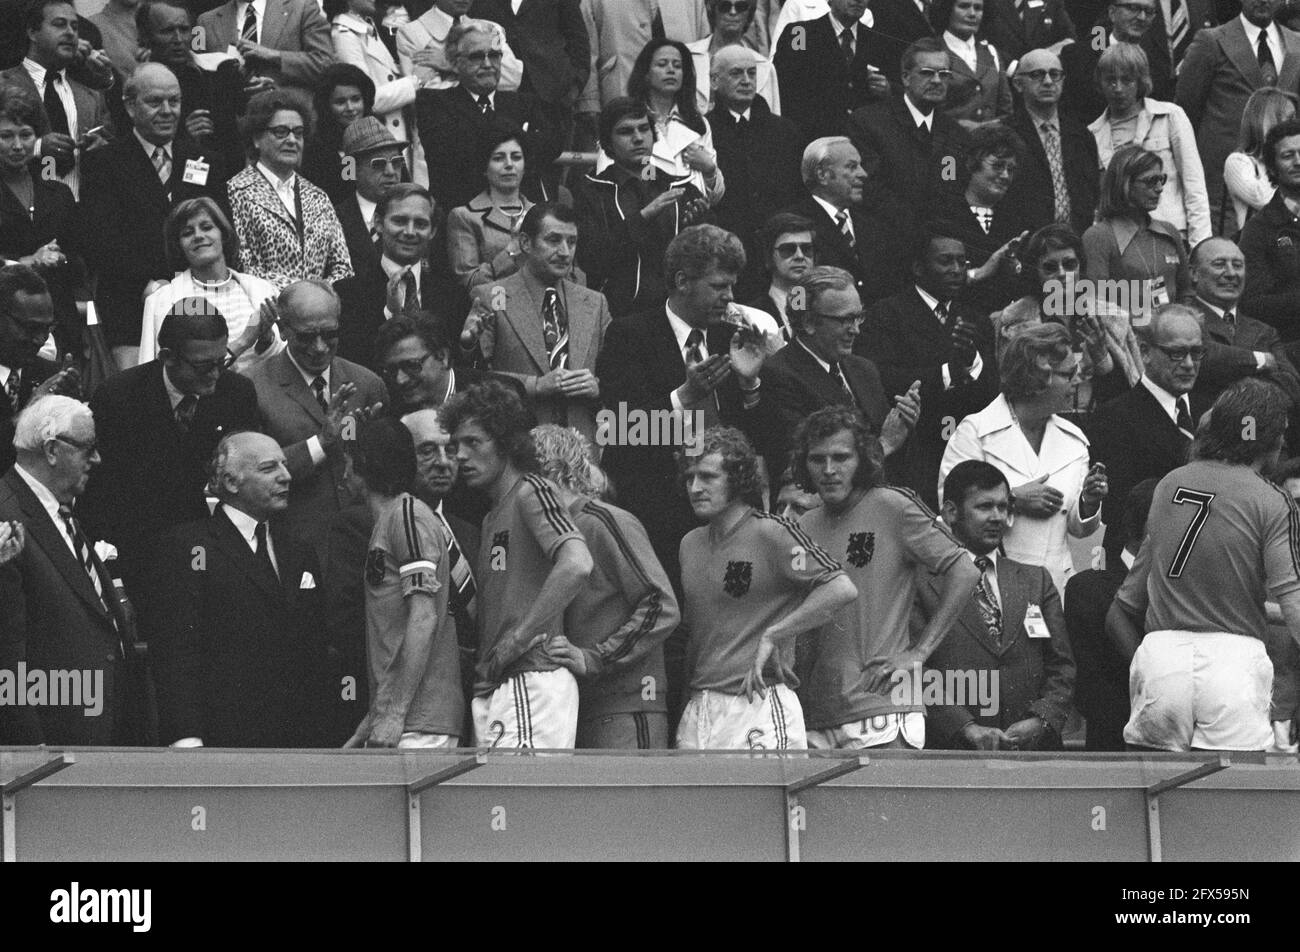 World Cup final 1974 in Munich, West Germany v. Netherlands 2-1; Dutch players in grandstand afterwards, July 7, 1974, finals, sports, soccer, world championships, The Netherlands, 20th century press agency photo, news to remember, documentary, historic photography 1945-1990, visual stories, human history of the Twentieth Century, capturing moments in time Stock Photo